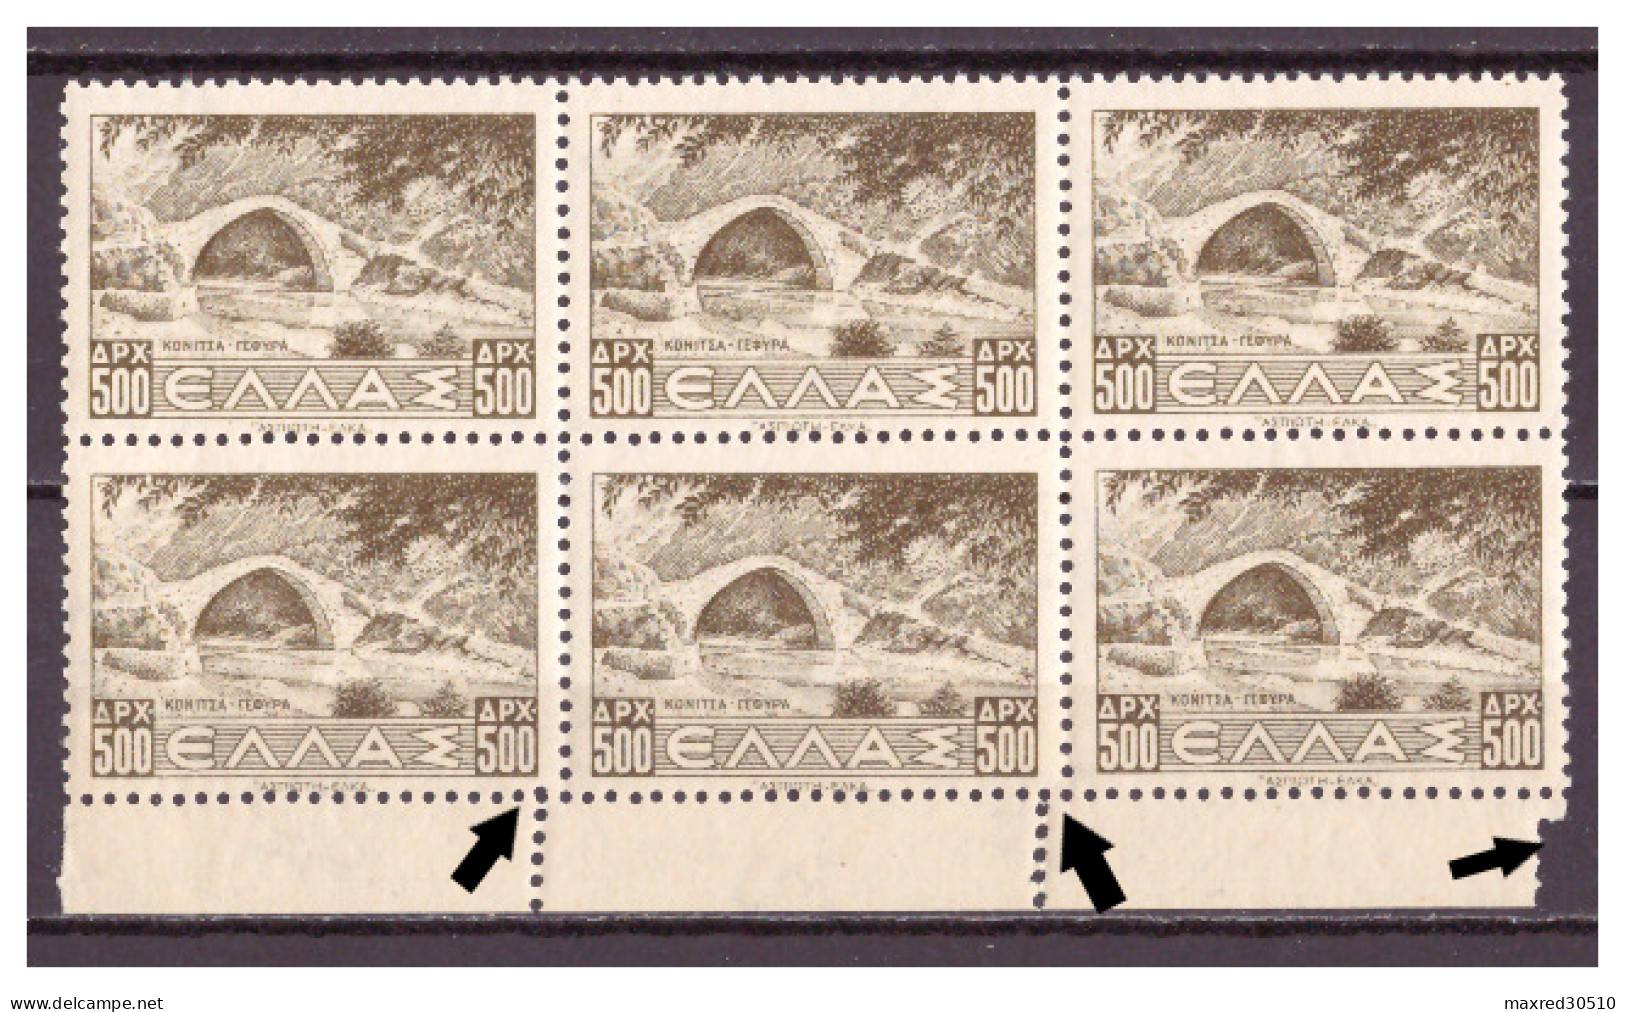 GREECE 1942 - 44 BLOCK OF 6X500DR. OF "LANDSCAPES ISSUE" WITH PRINTING ERRORS AT THE VERTICAL PERFO OF MARGIN SHEET MNH - Abarten Und Kuriositäten